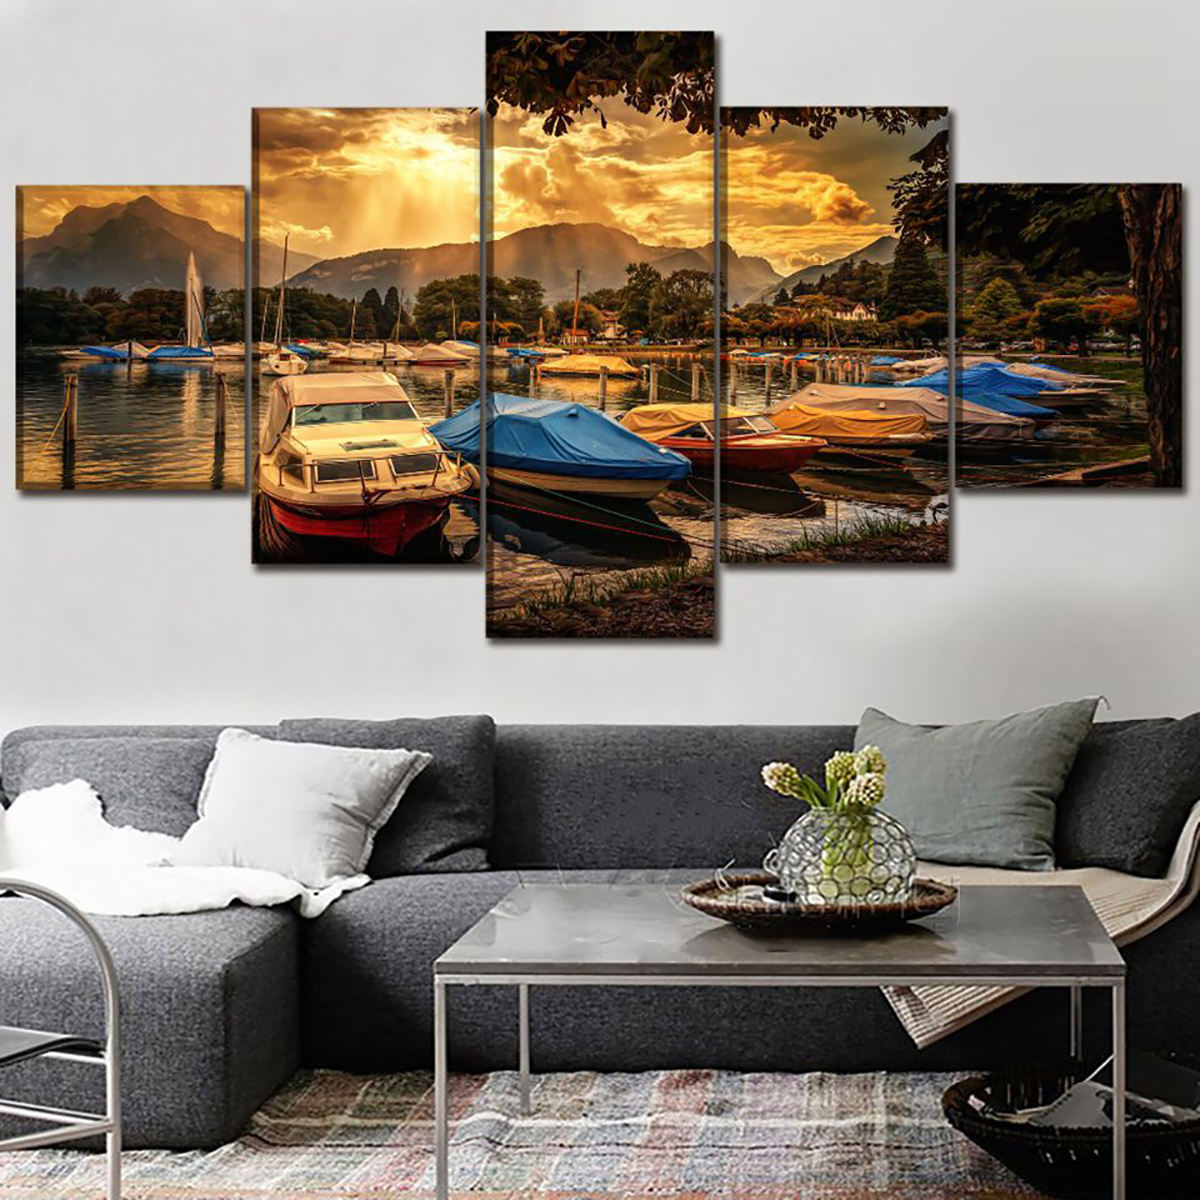 5Pcs-Canvas-Print-Paintings-Scenery-Oil-Painting-Wall-Decorative-Printing-Art-Picture-Frameless-Home-1758668-6